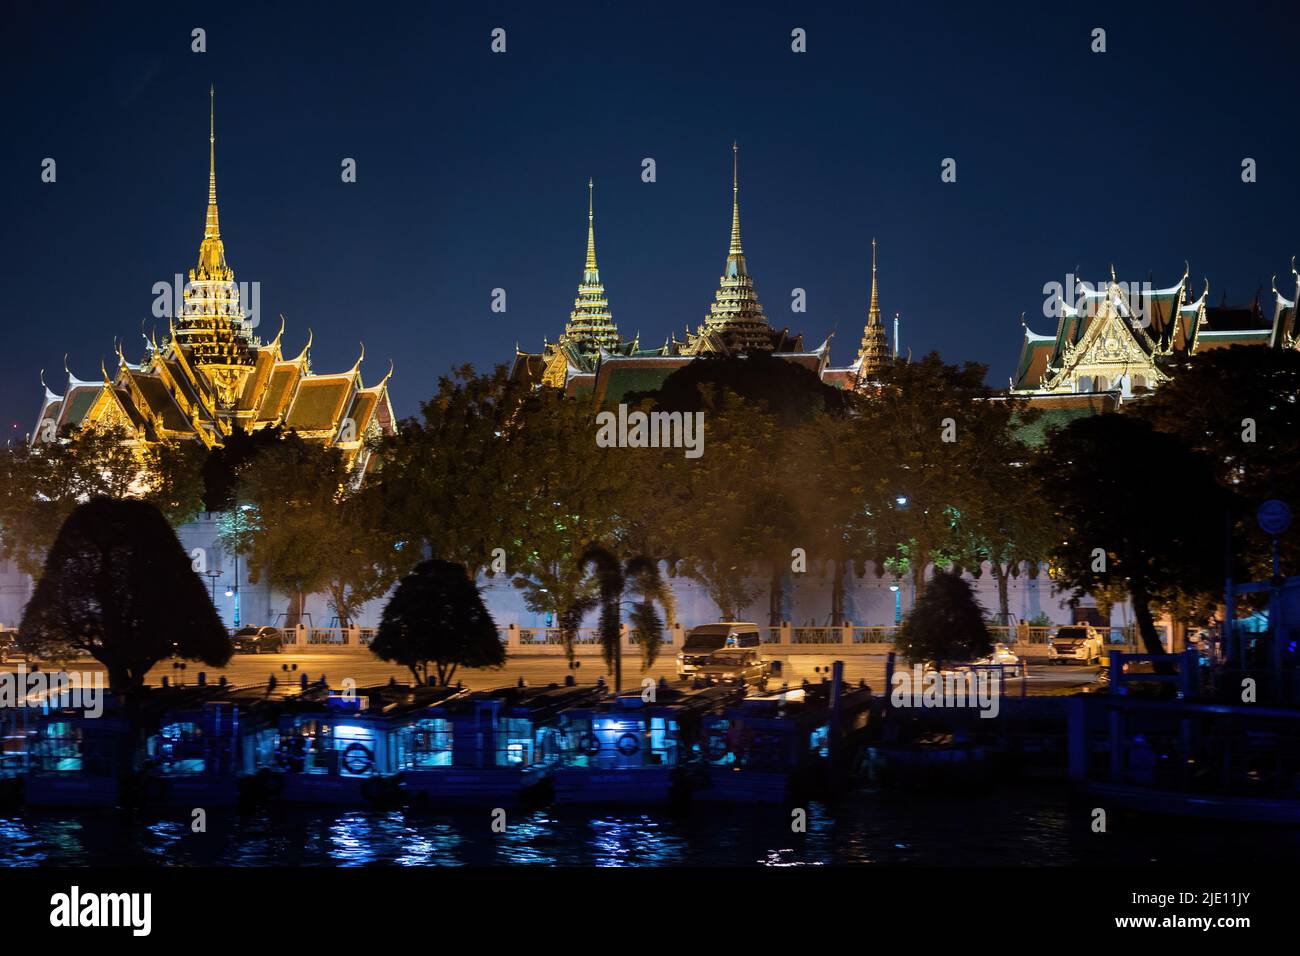 Evening view of the Grand Palace Wat Phra Keaw from the Chao Phraya river in Bangkok, Thailand Stock Photo